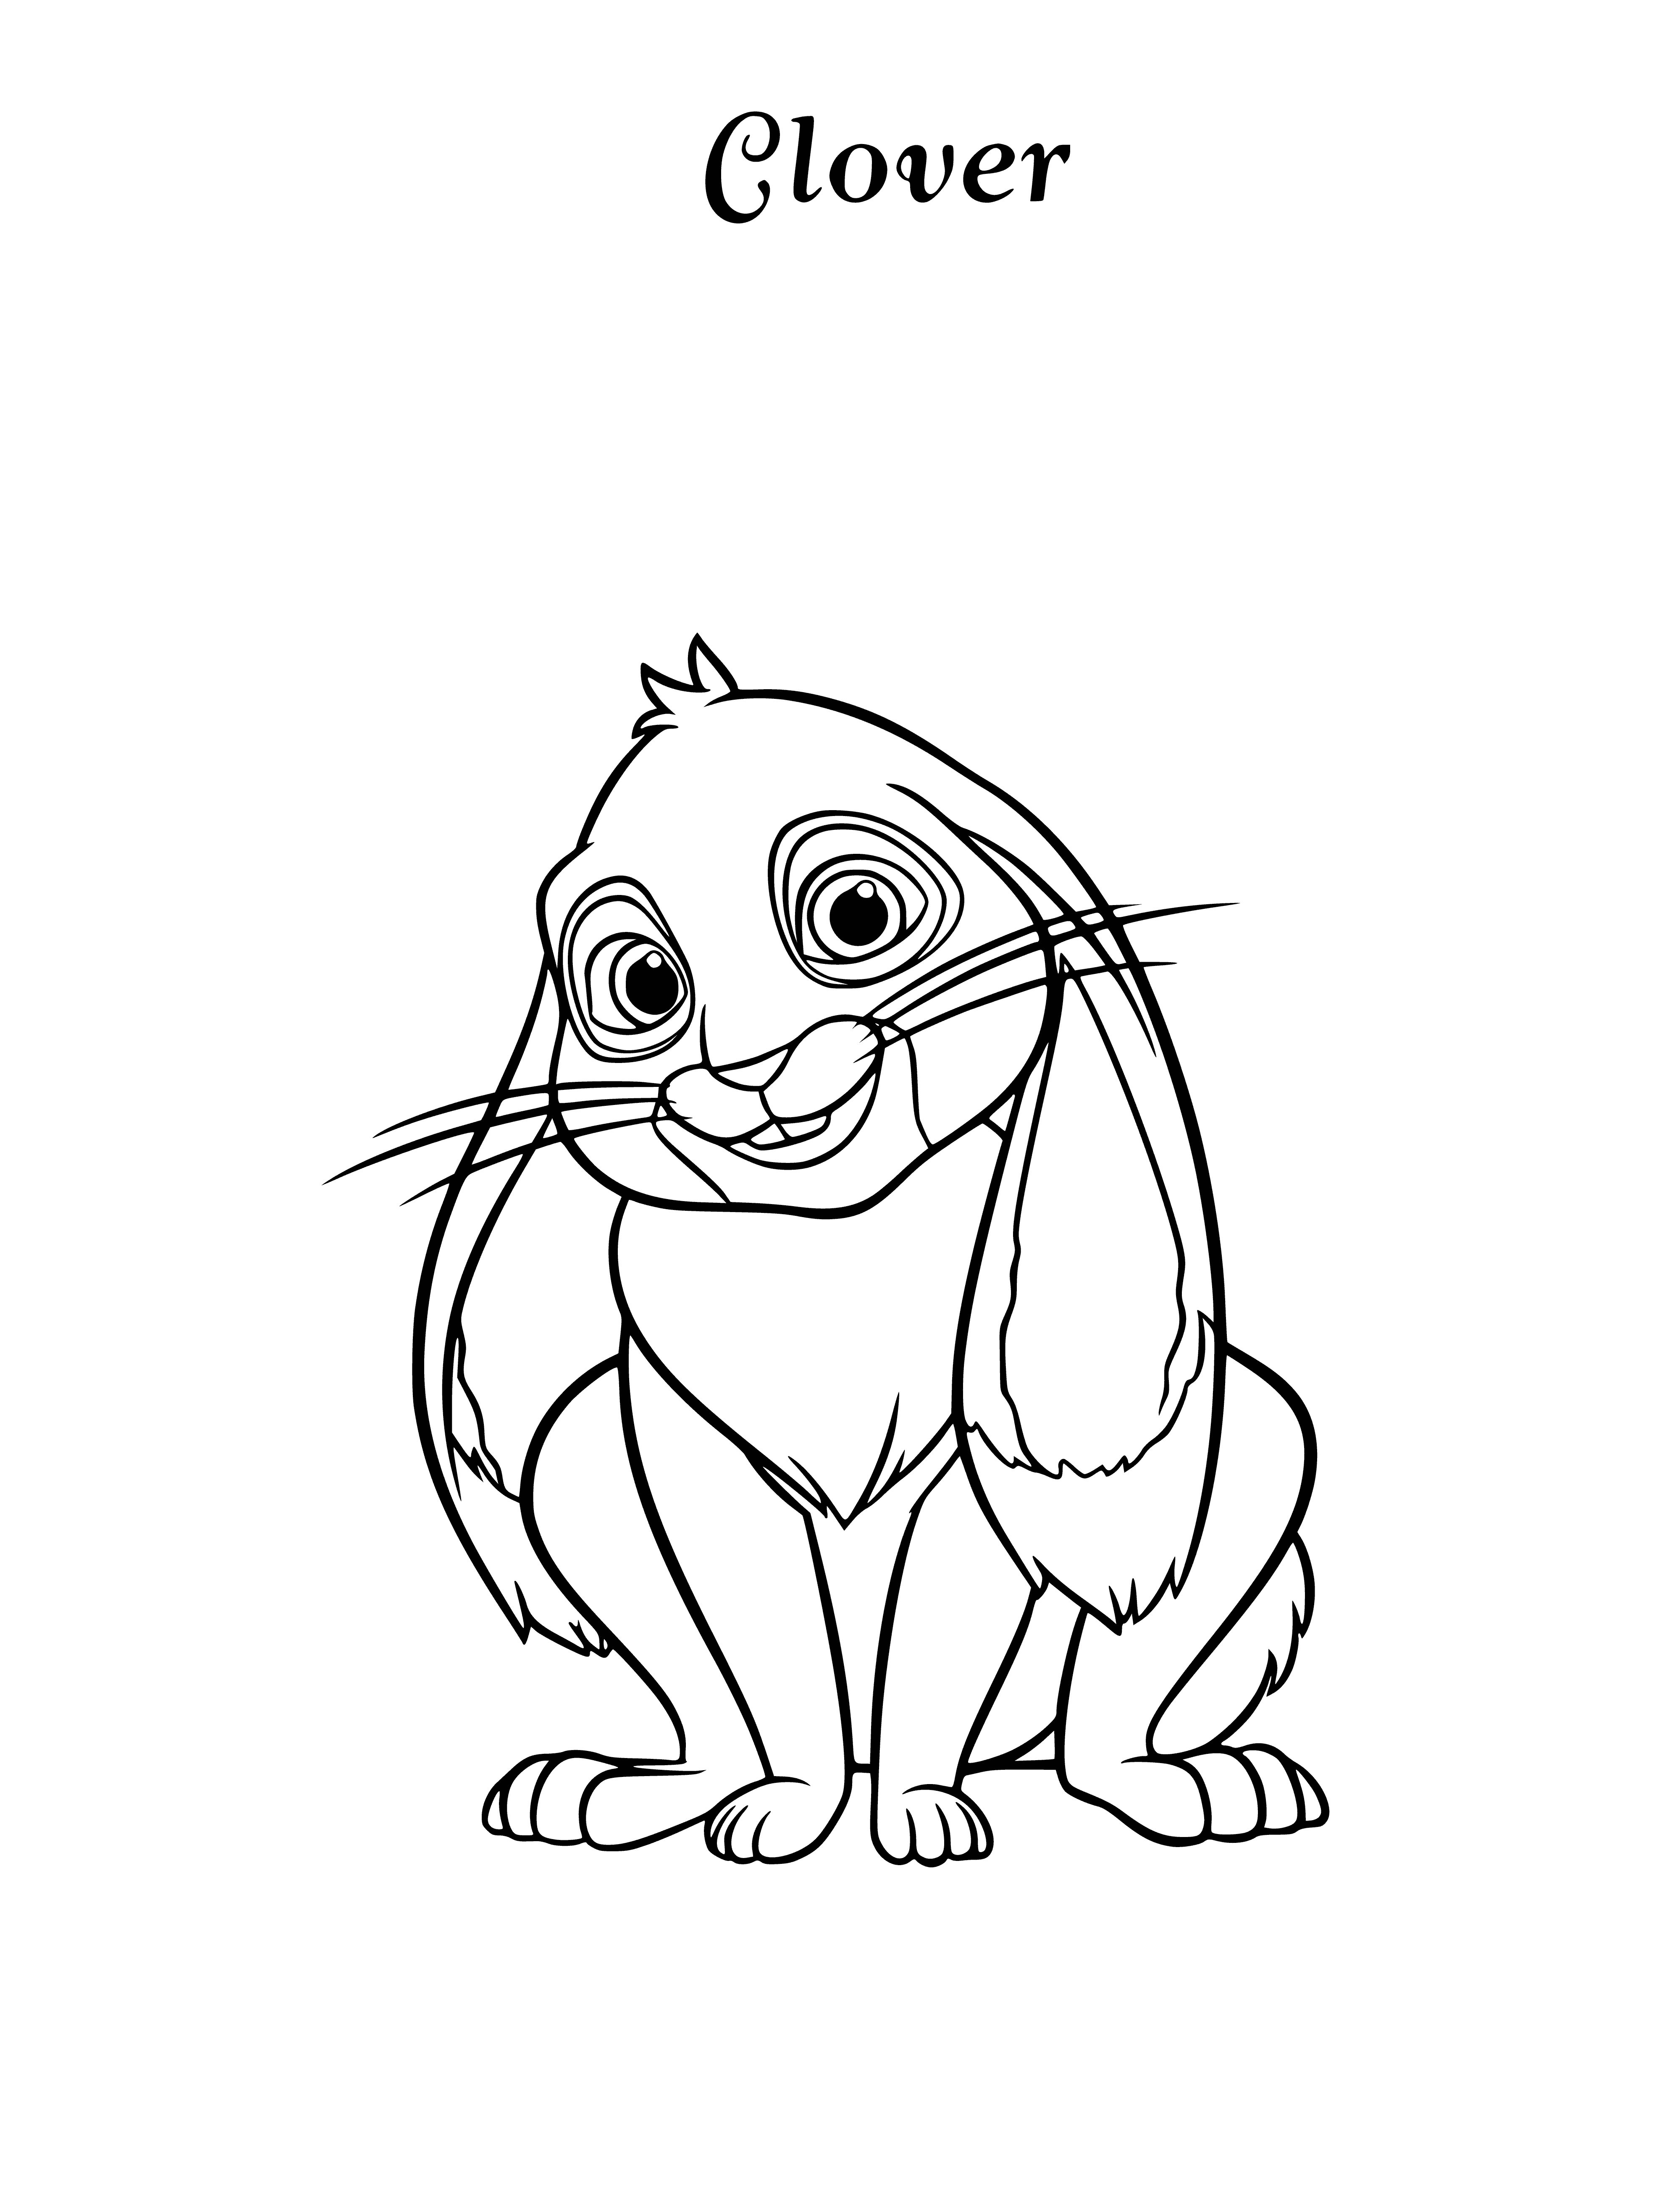 Rabbit Clover coloring page